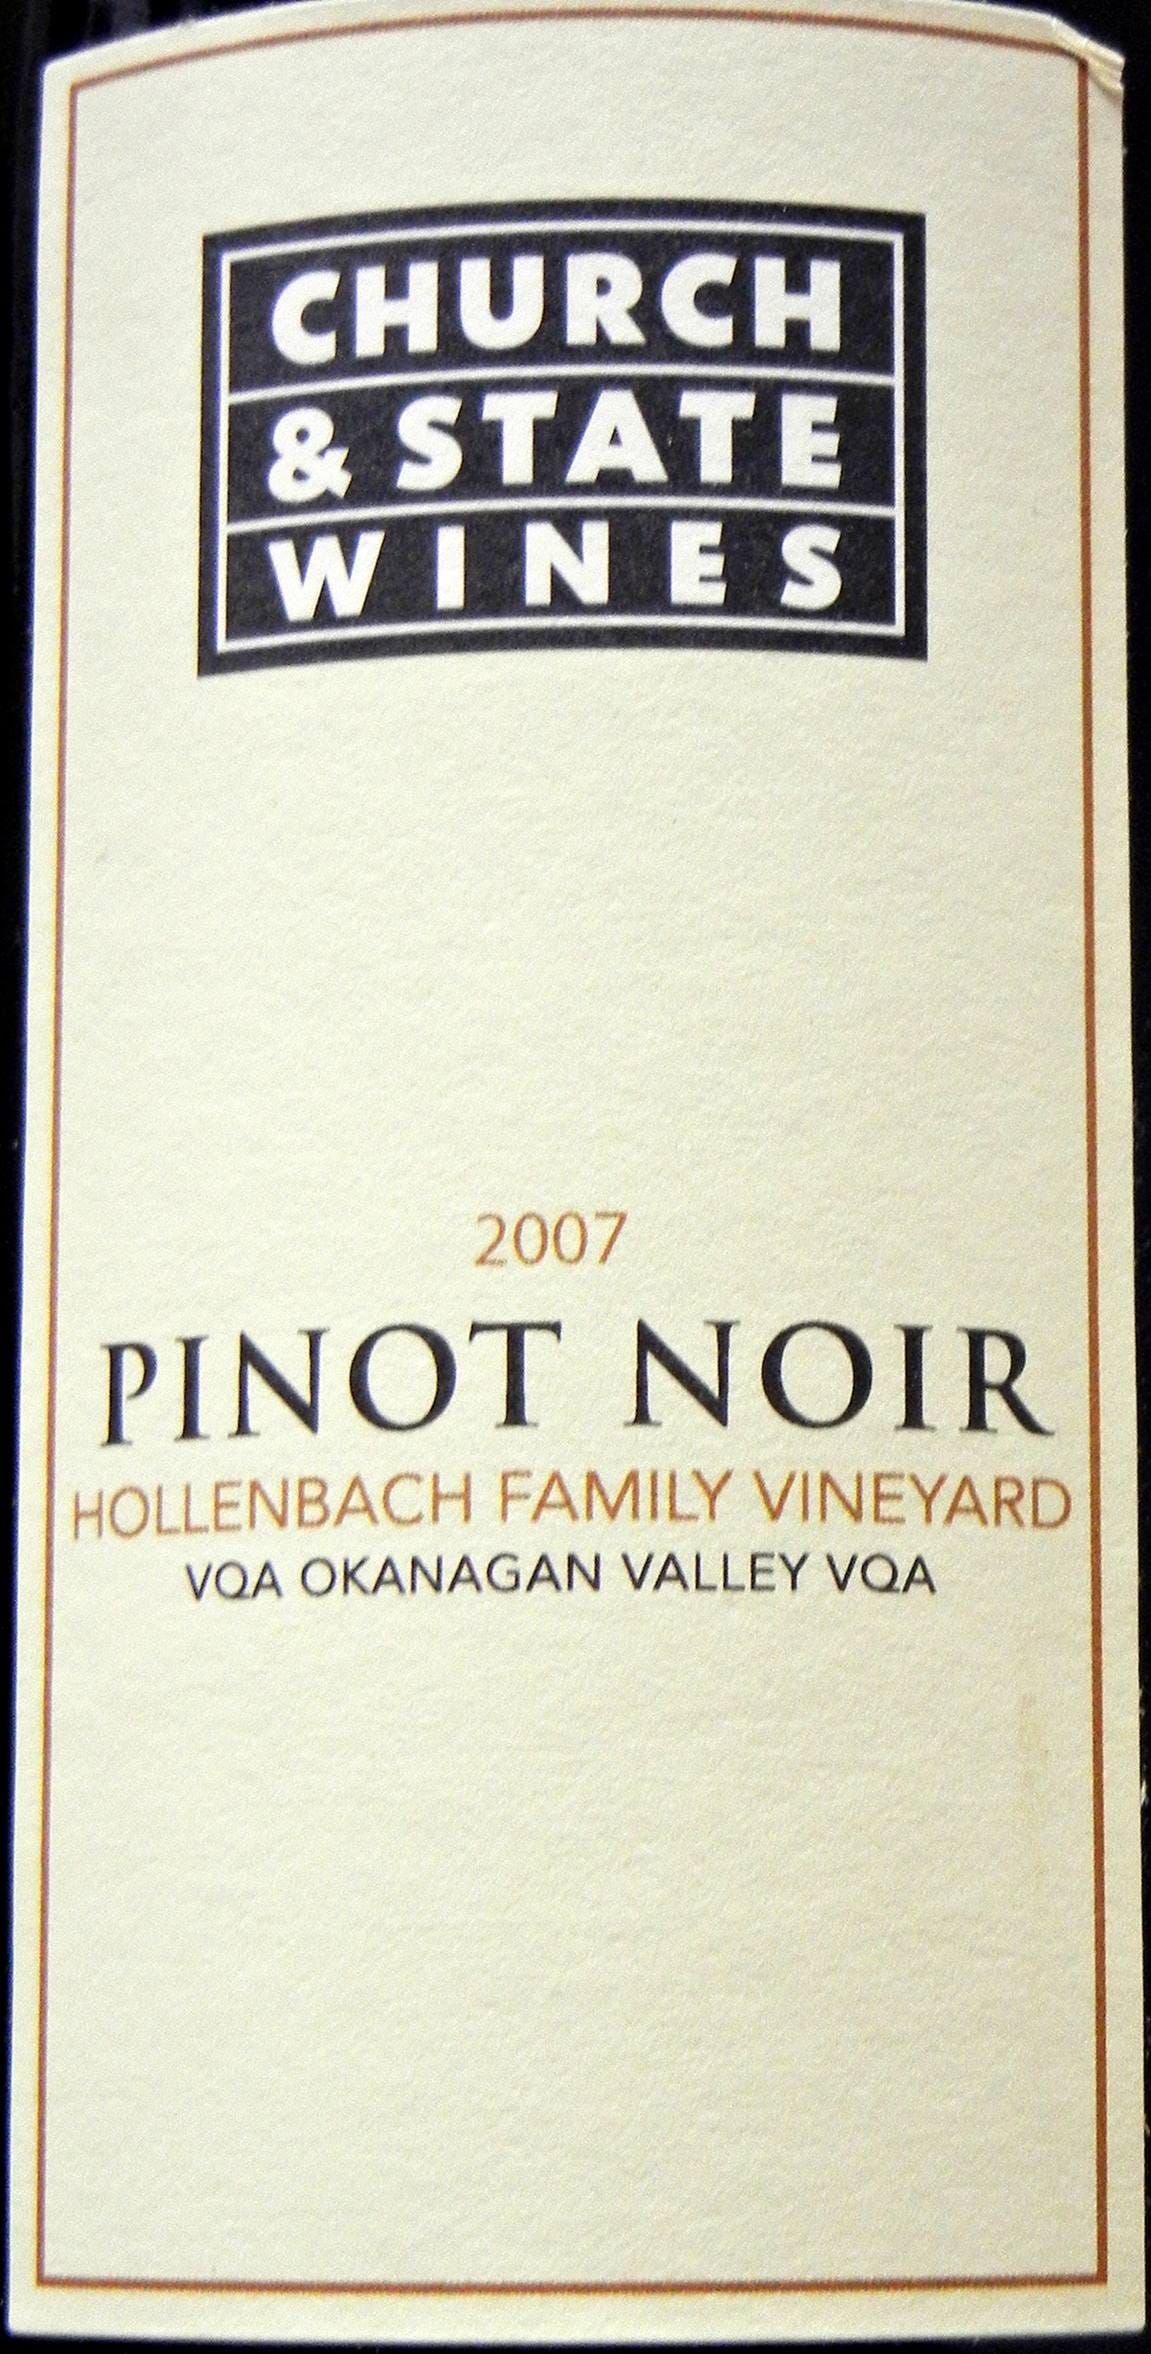 Church & State Hollenbach Pinot Noir 2007 Label - BC Pinot Noir Tasting Review 2